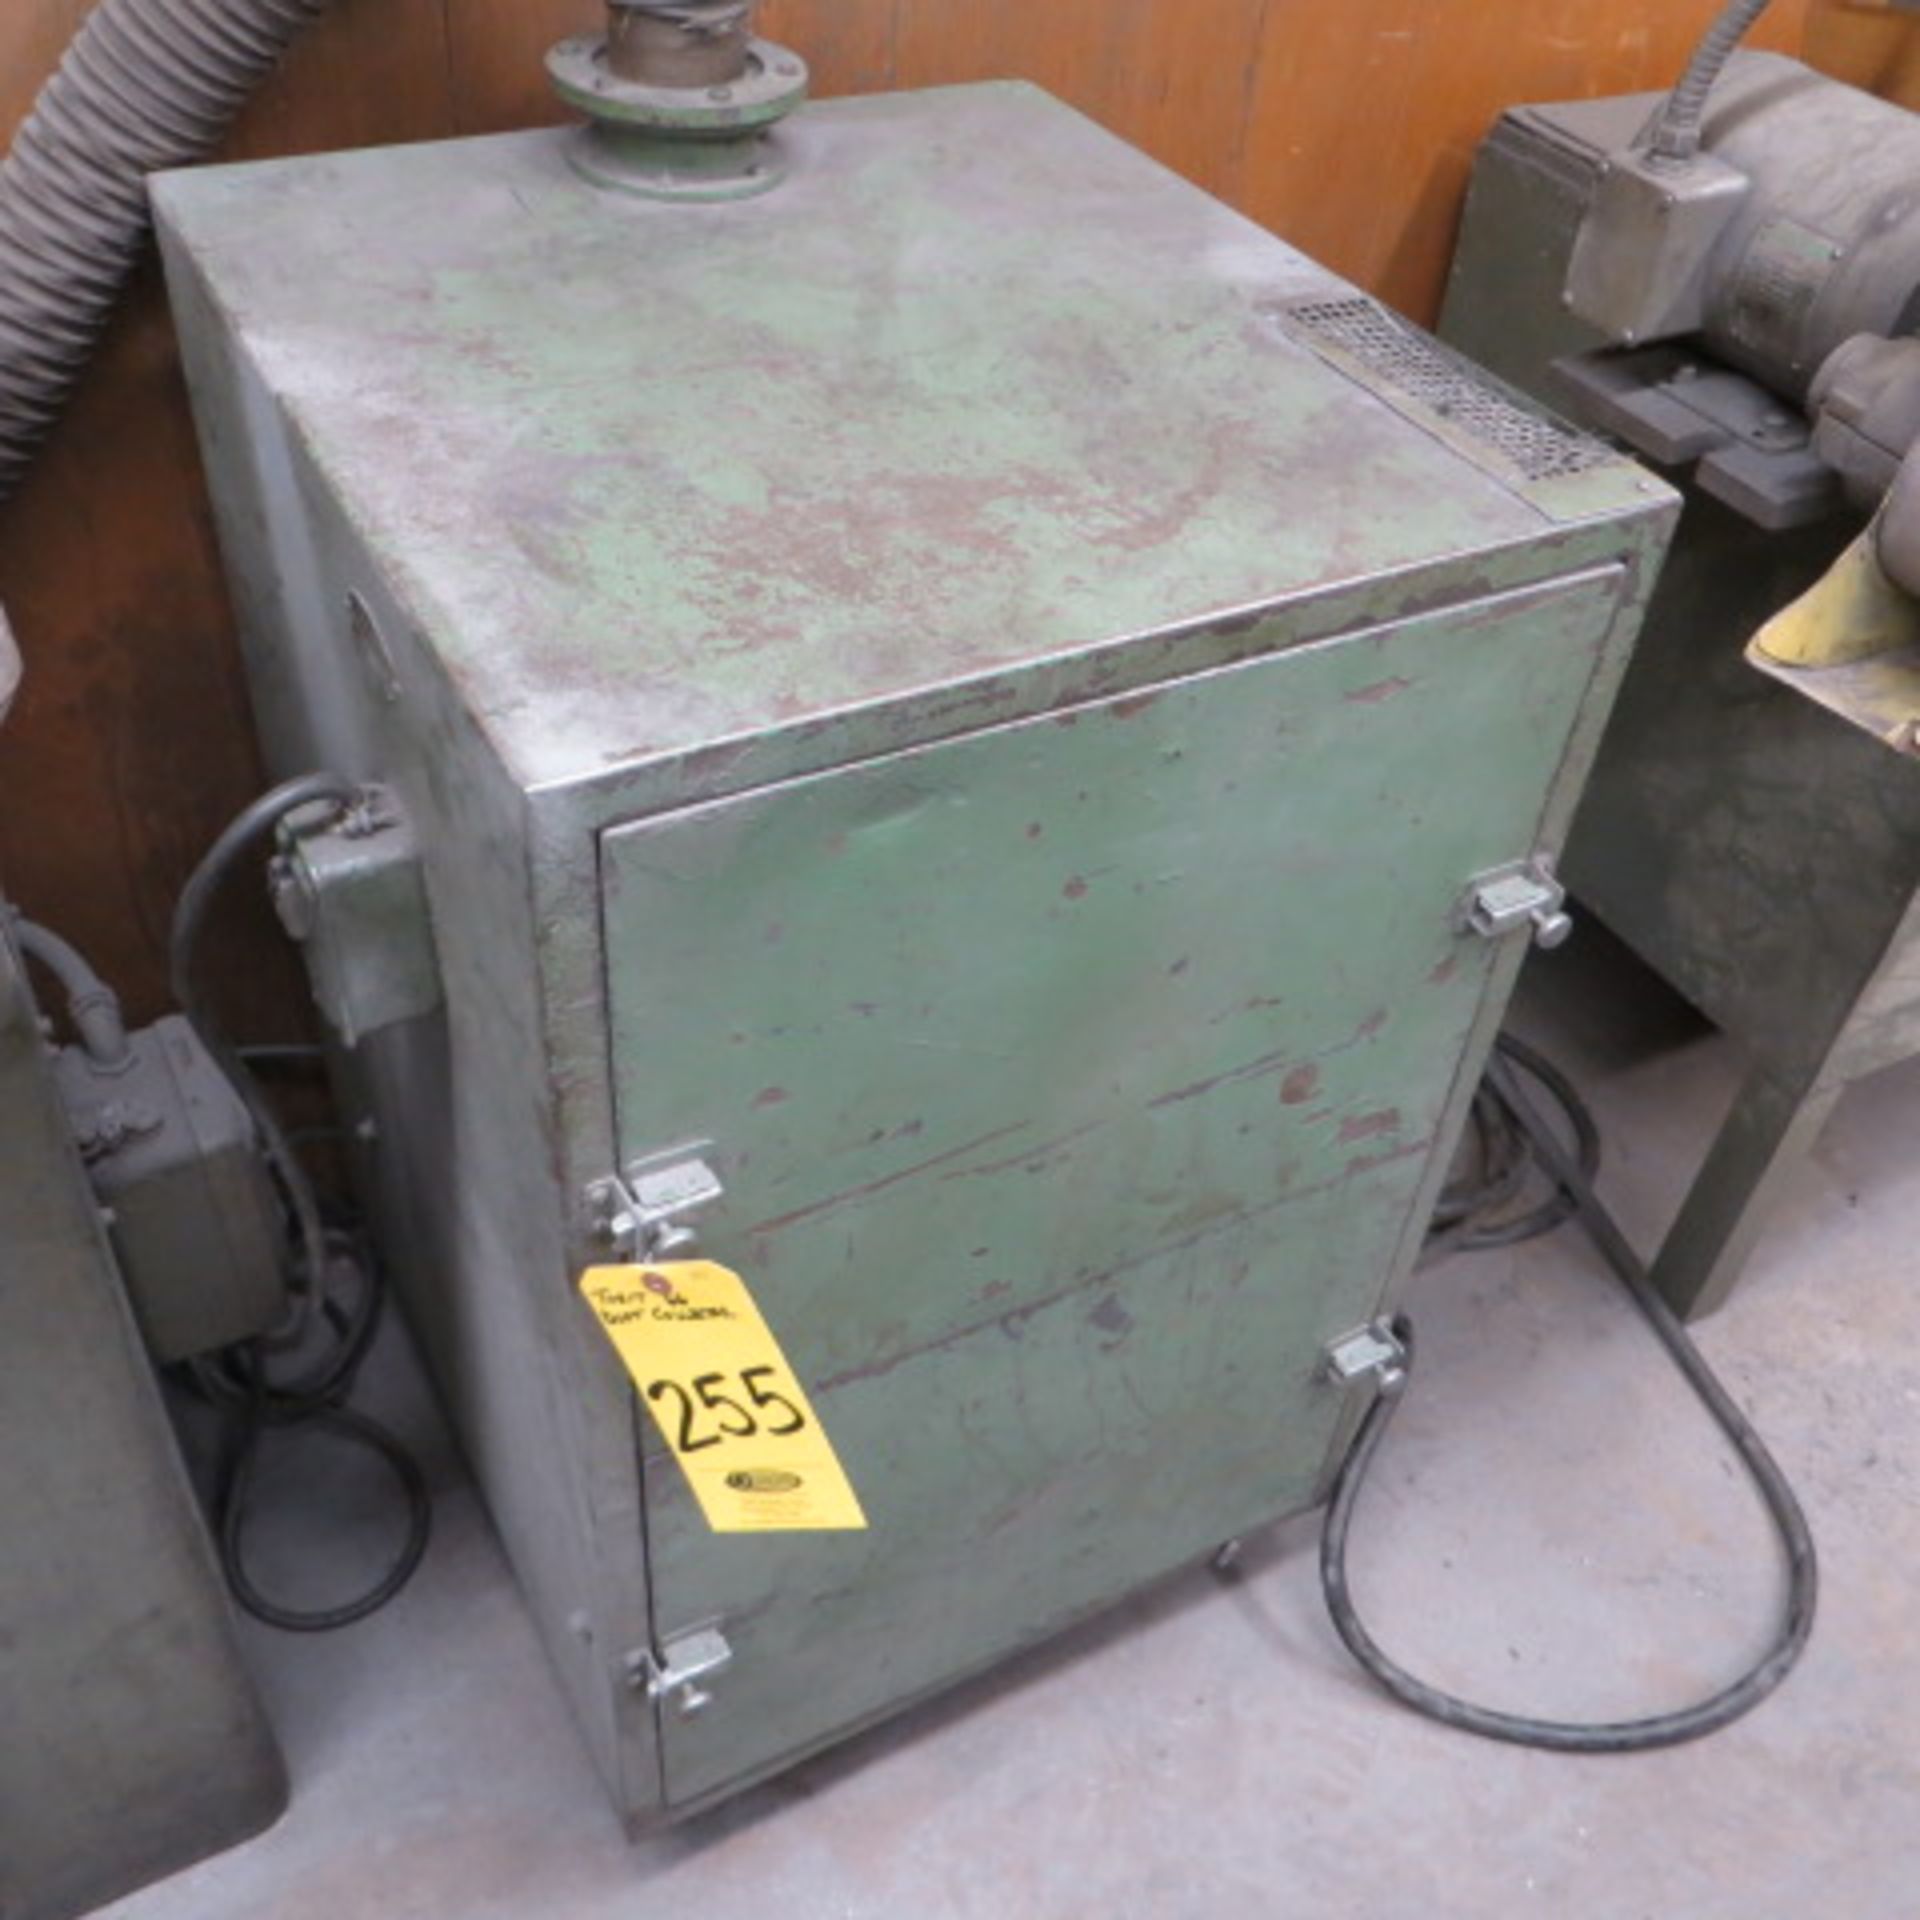 TORIT MDL. 66 DUST COLLECTOR, S/N 25577, 1/2 HP